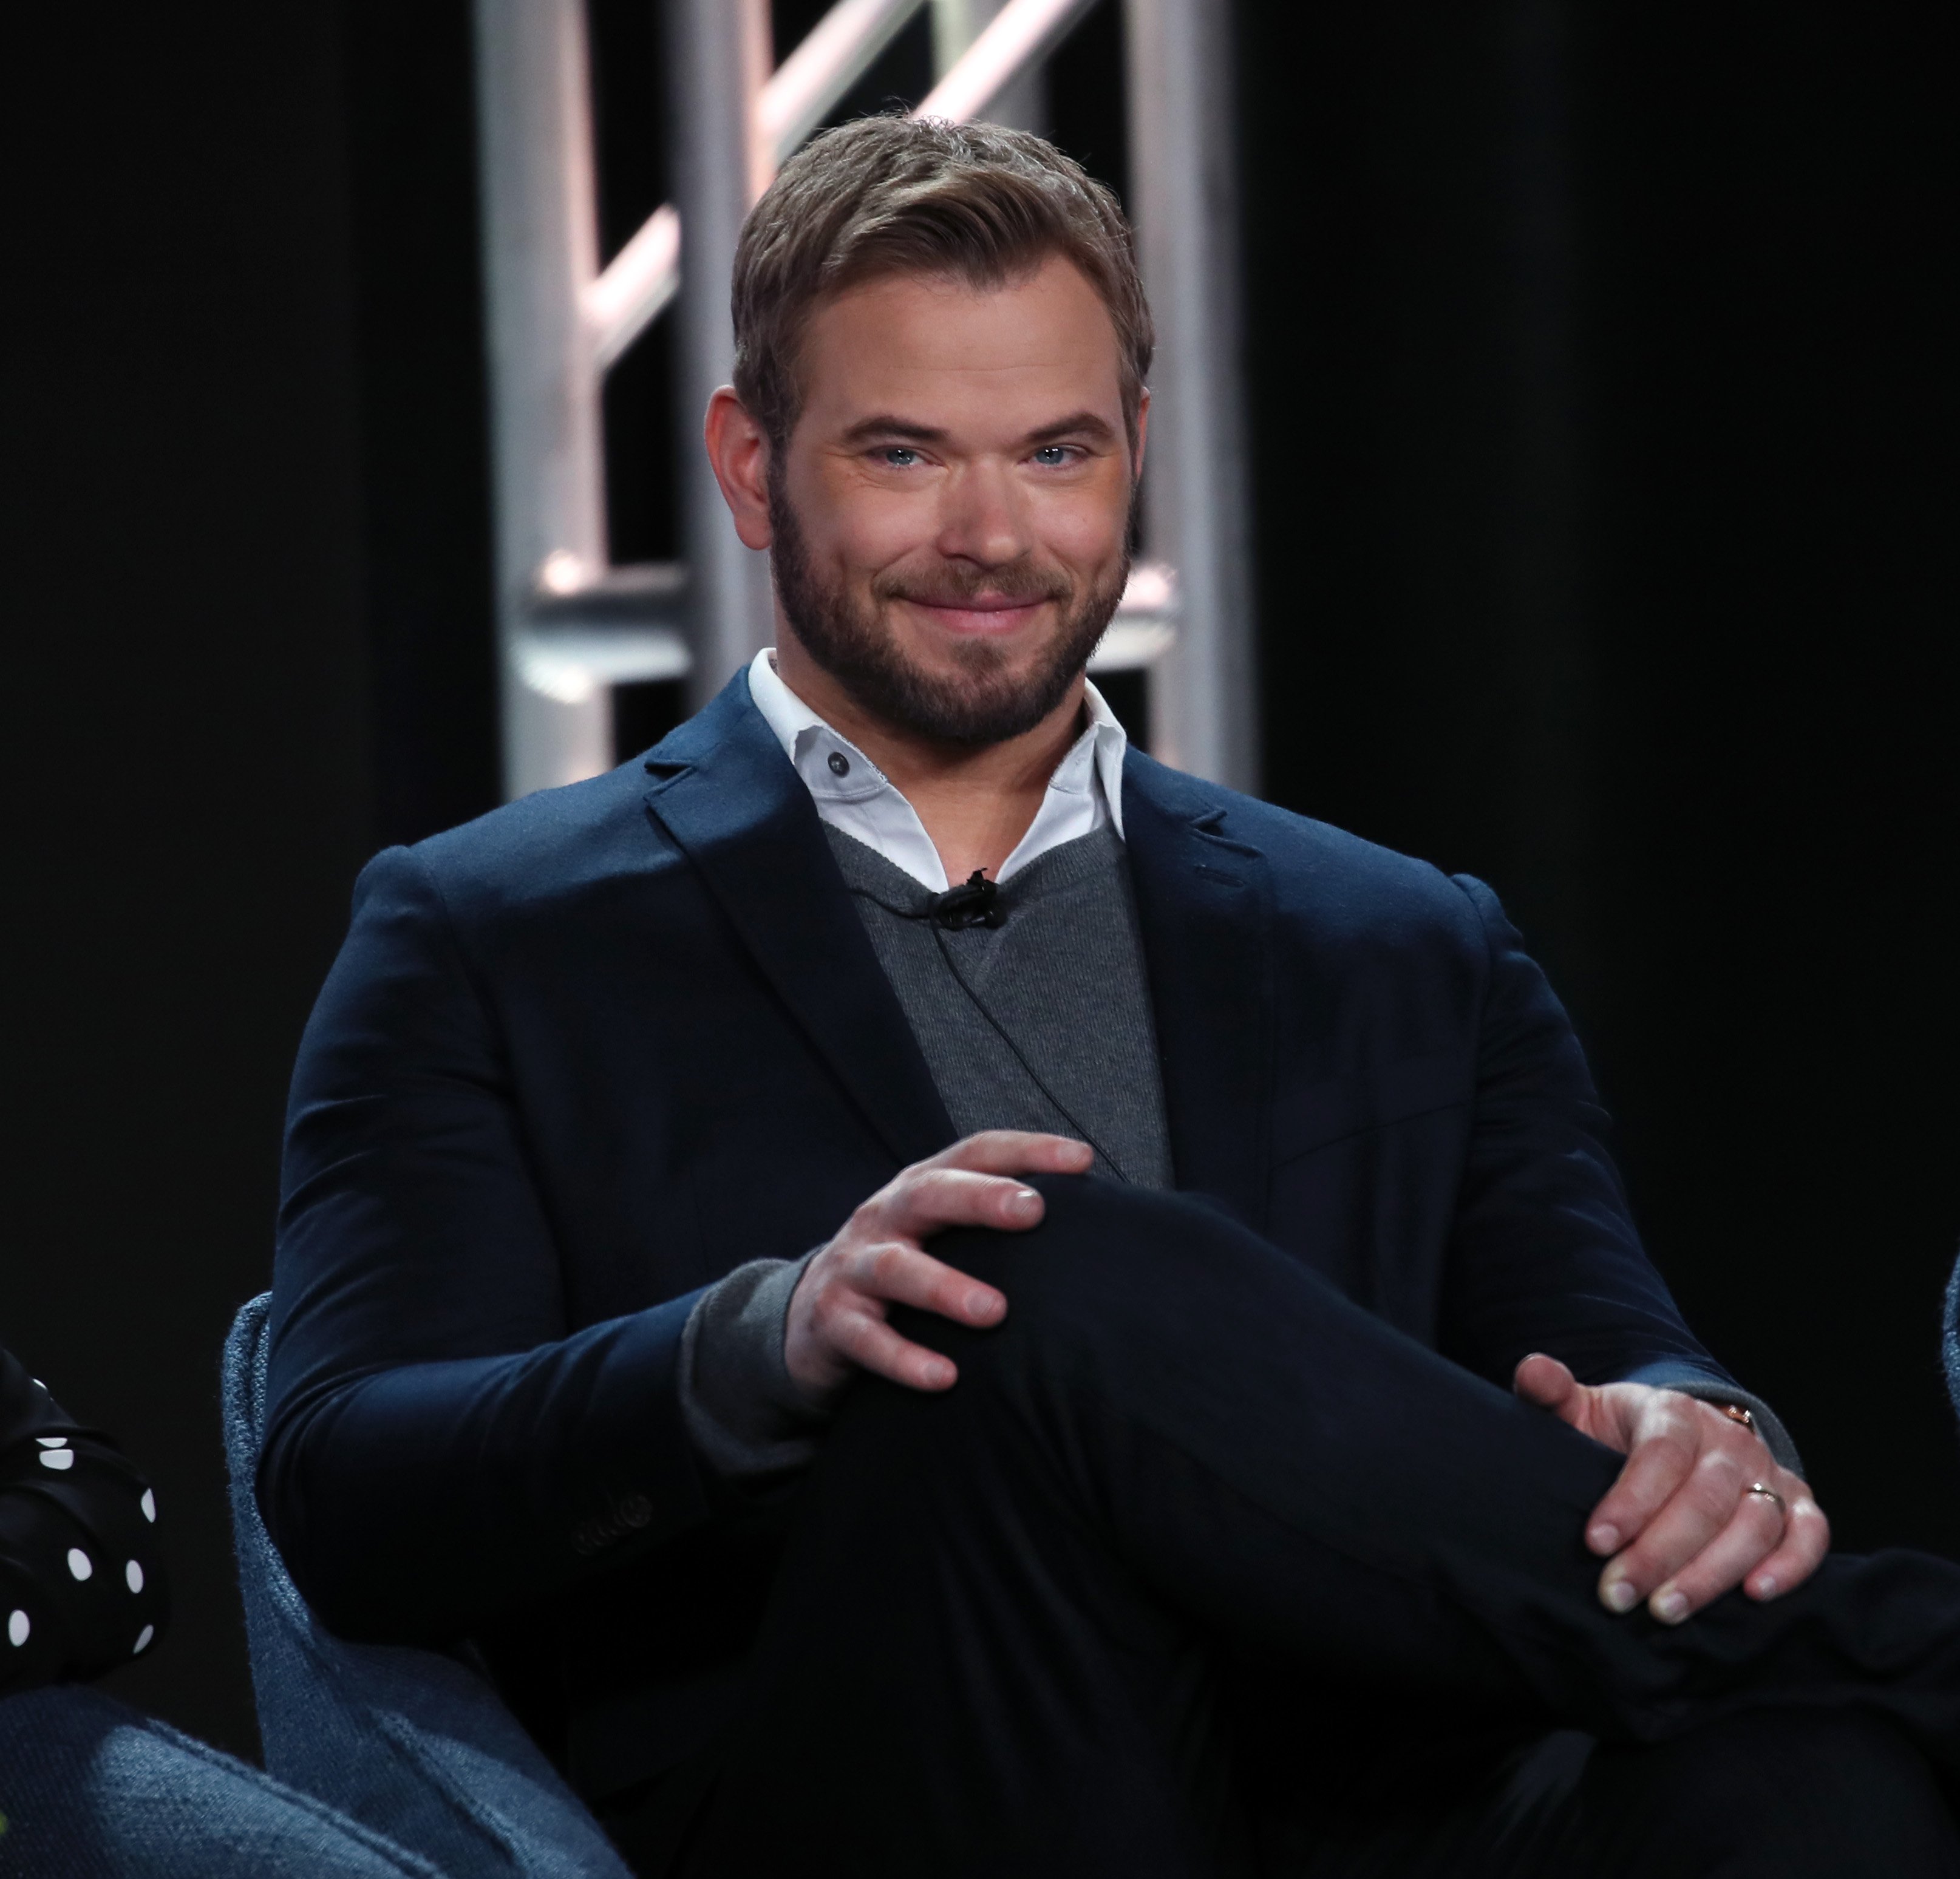 Kellan Lutz of "FBI: The Most Wanted" speaks during the CBS segment of the 2020 Winter TCA Press Tour on January 12, 2020 | Photo: Getty Images